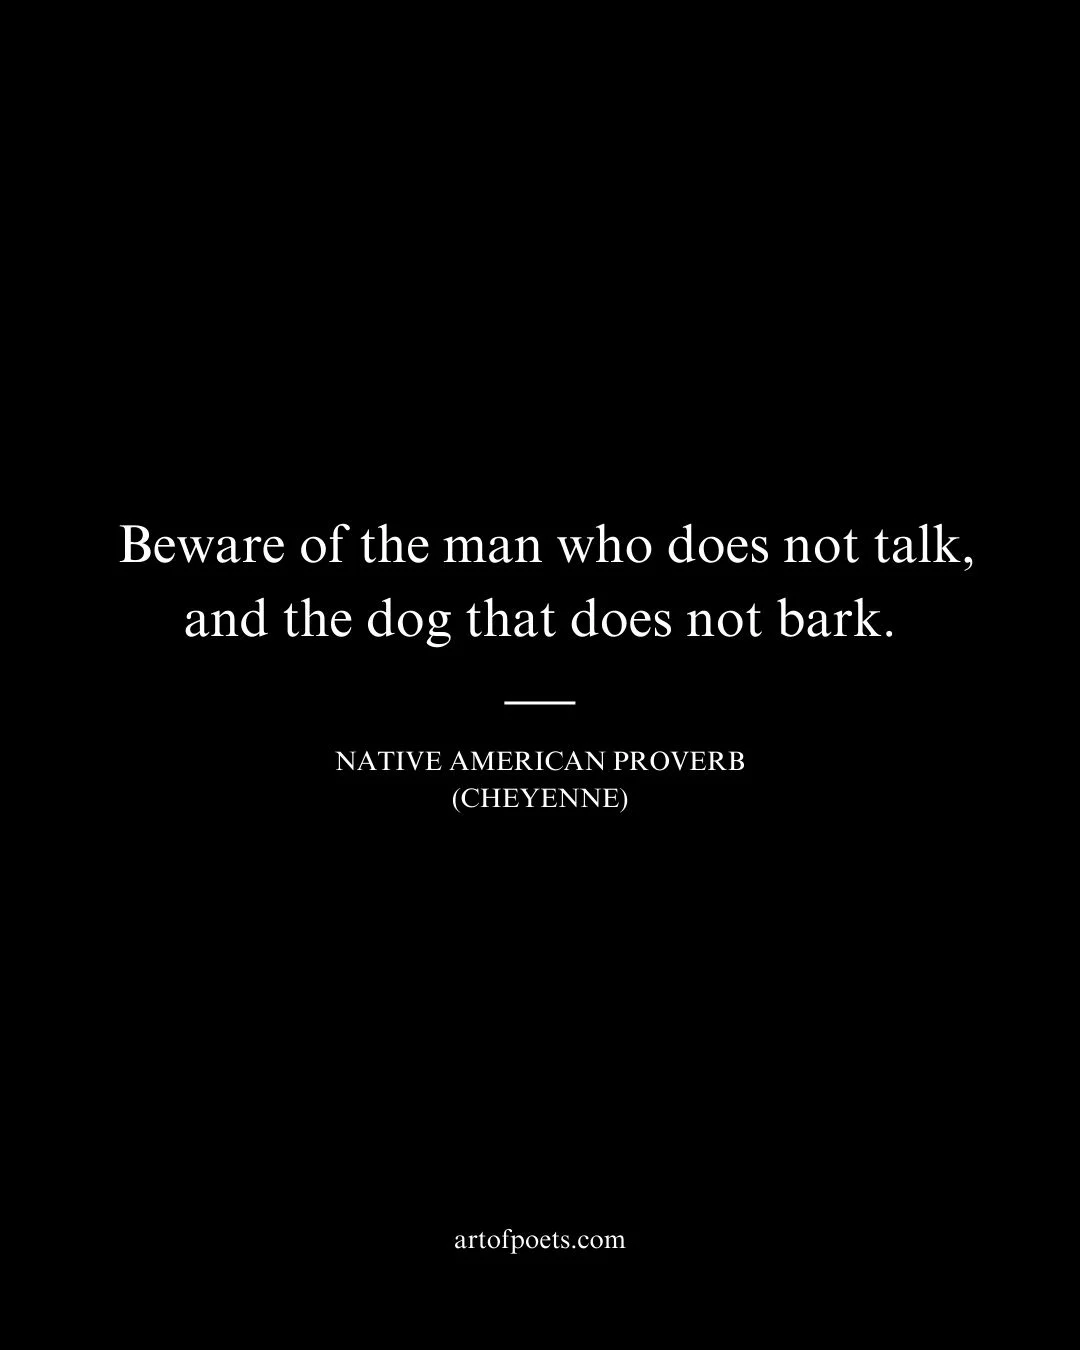 Beware of the man who does not talk and the dog that does not bark